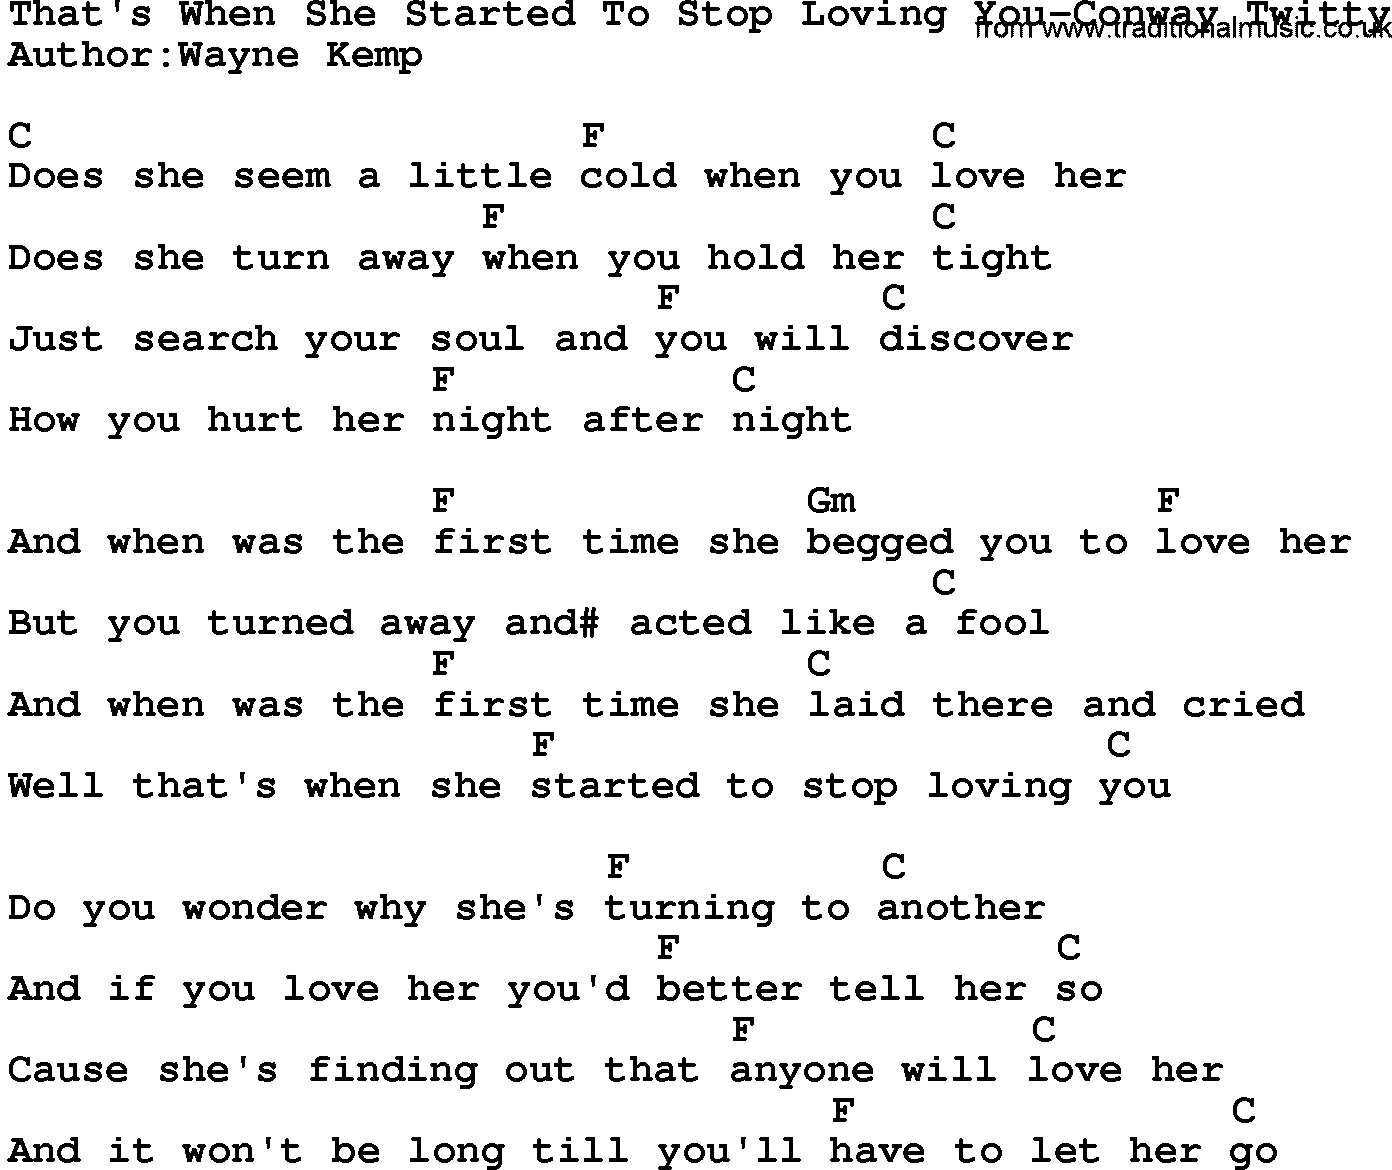 Country music song: That's When She Started To Stop Loving You-Conway Twitty lyrics and chords